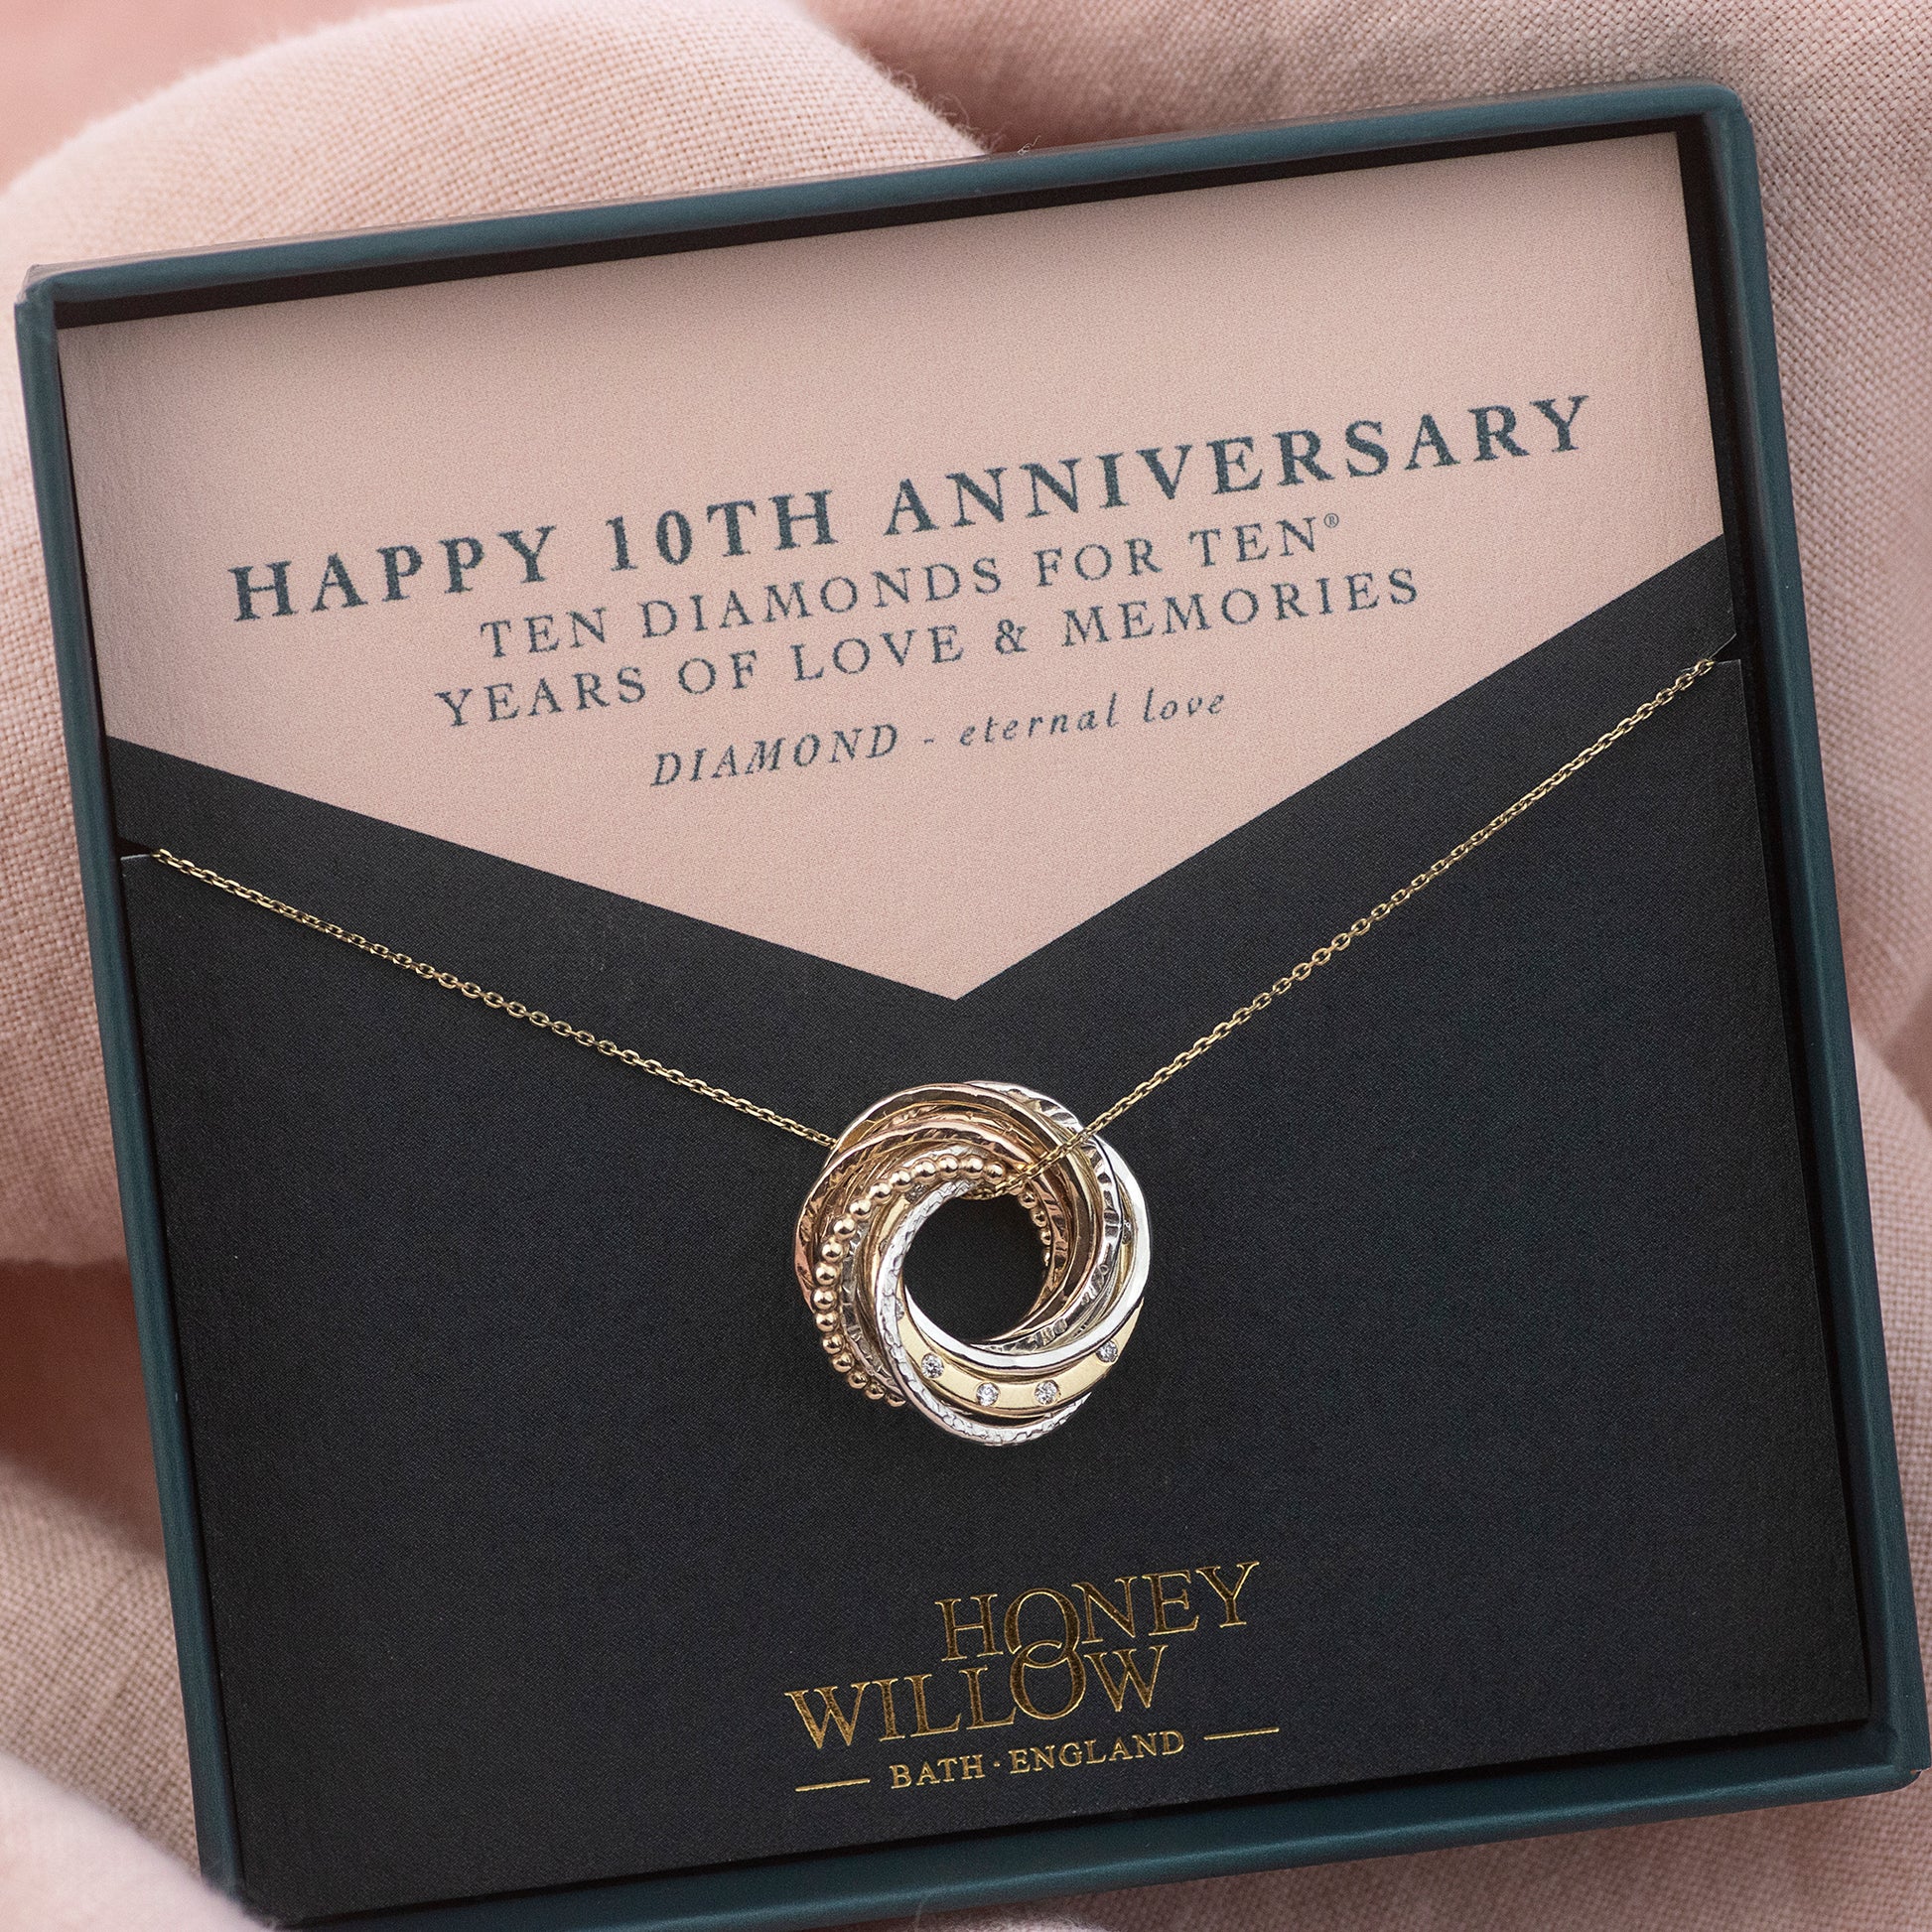 9kt Diamond 10th Anniversary Necklace - The Original 10 Diamonds for 10 Years Necklaces - Recycled Gold and Silver 